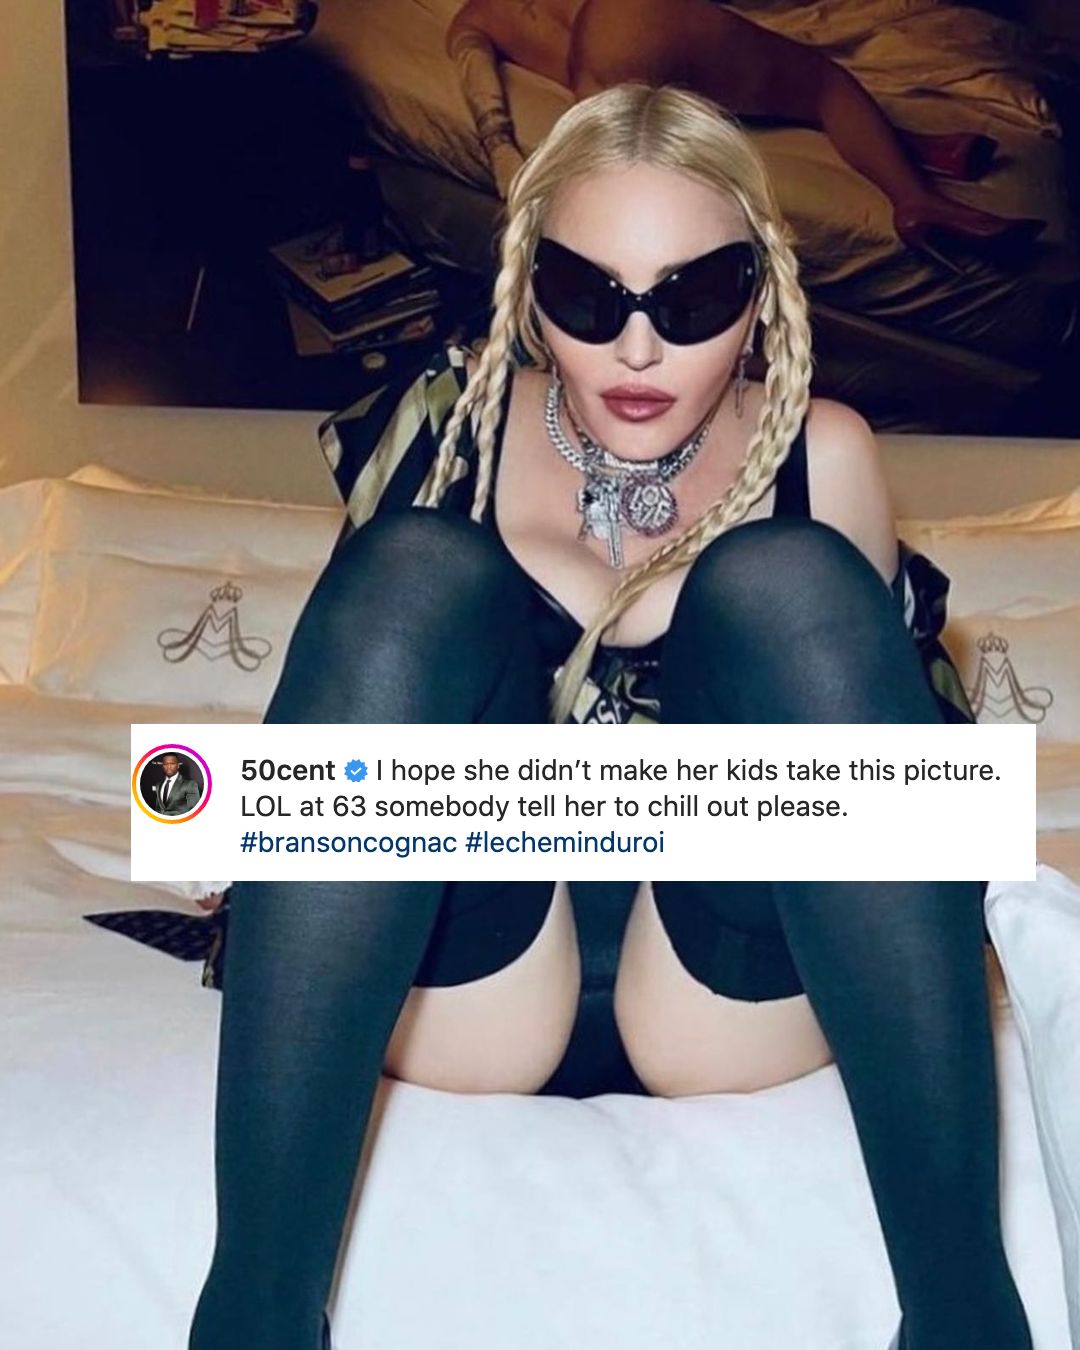 Madonna slams 50 Cent for 'talking smack' about racy photos